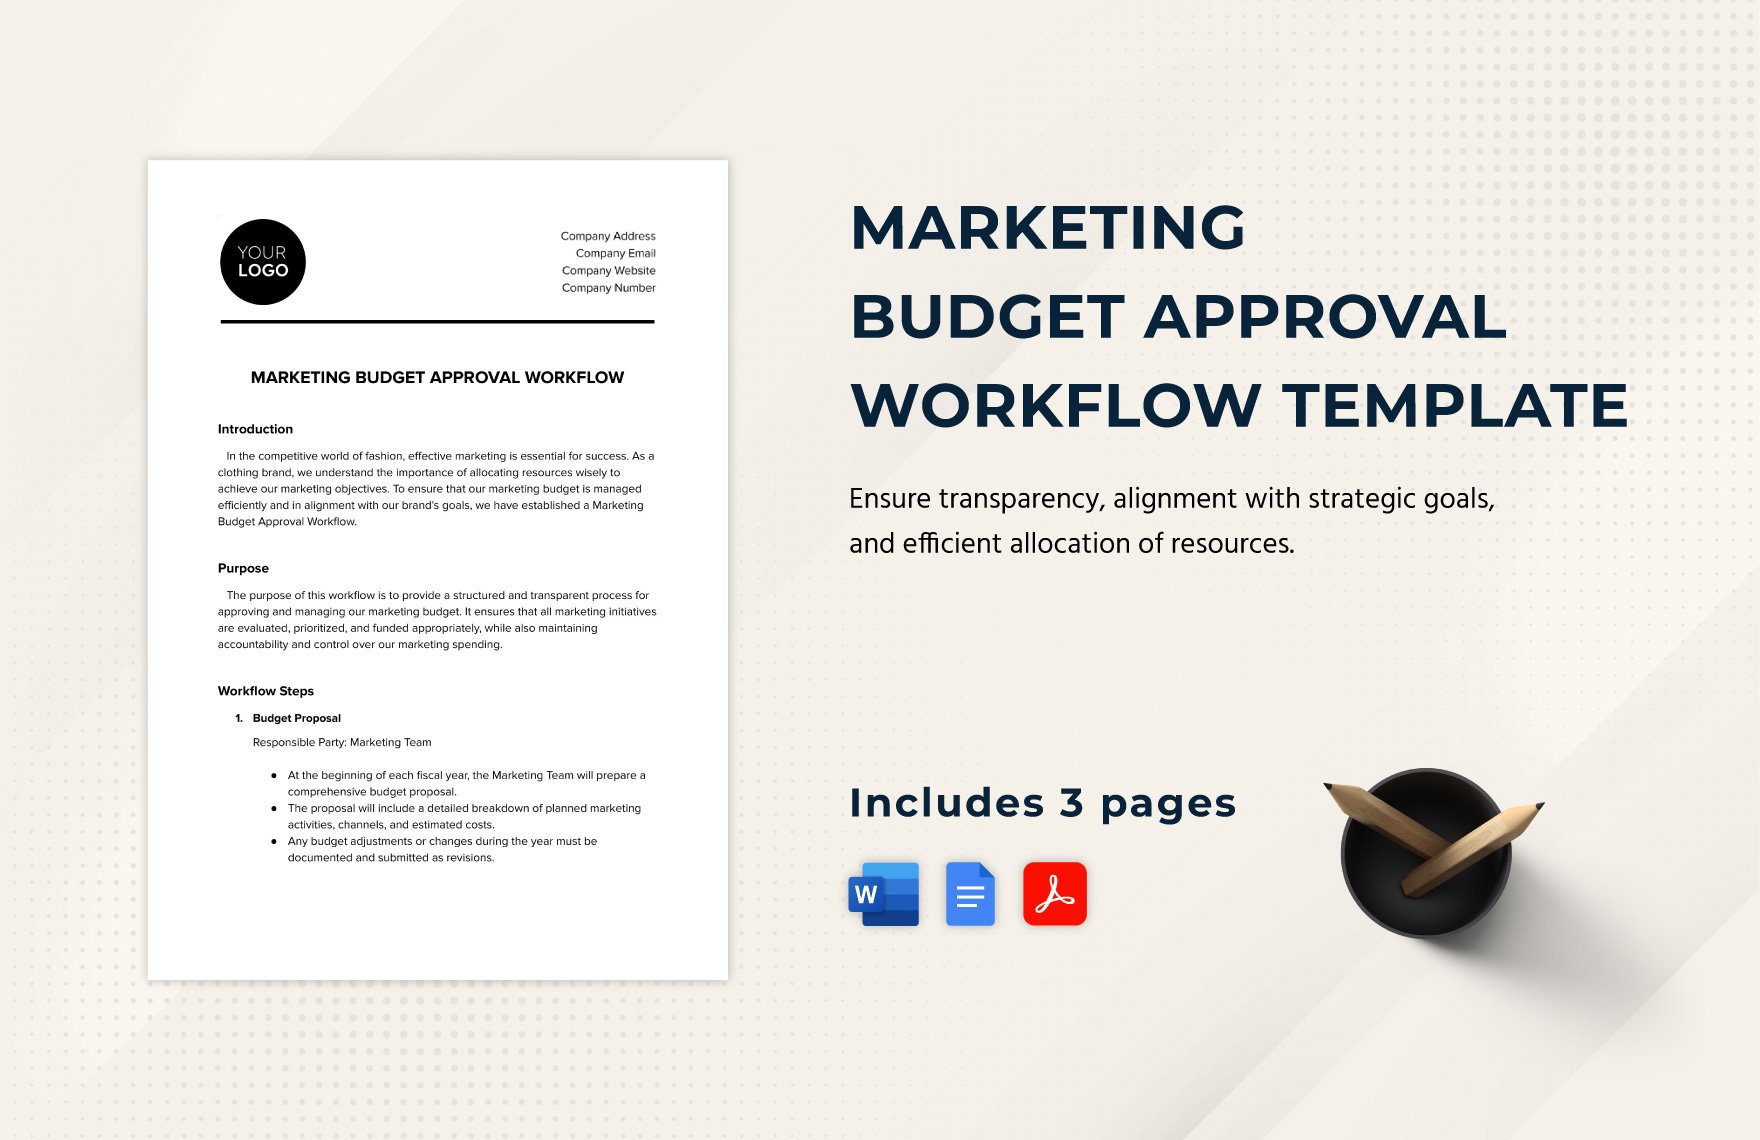 Marketing Budget Approval Workflow Template